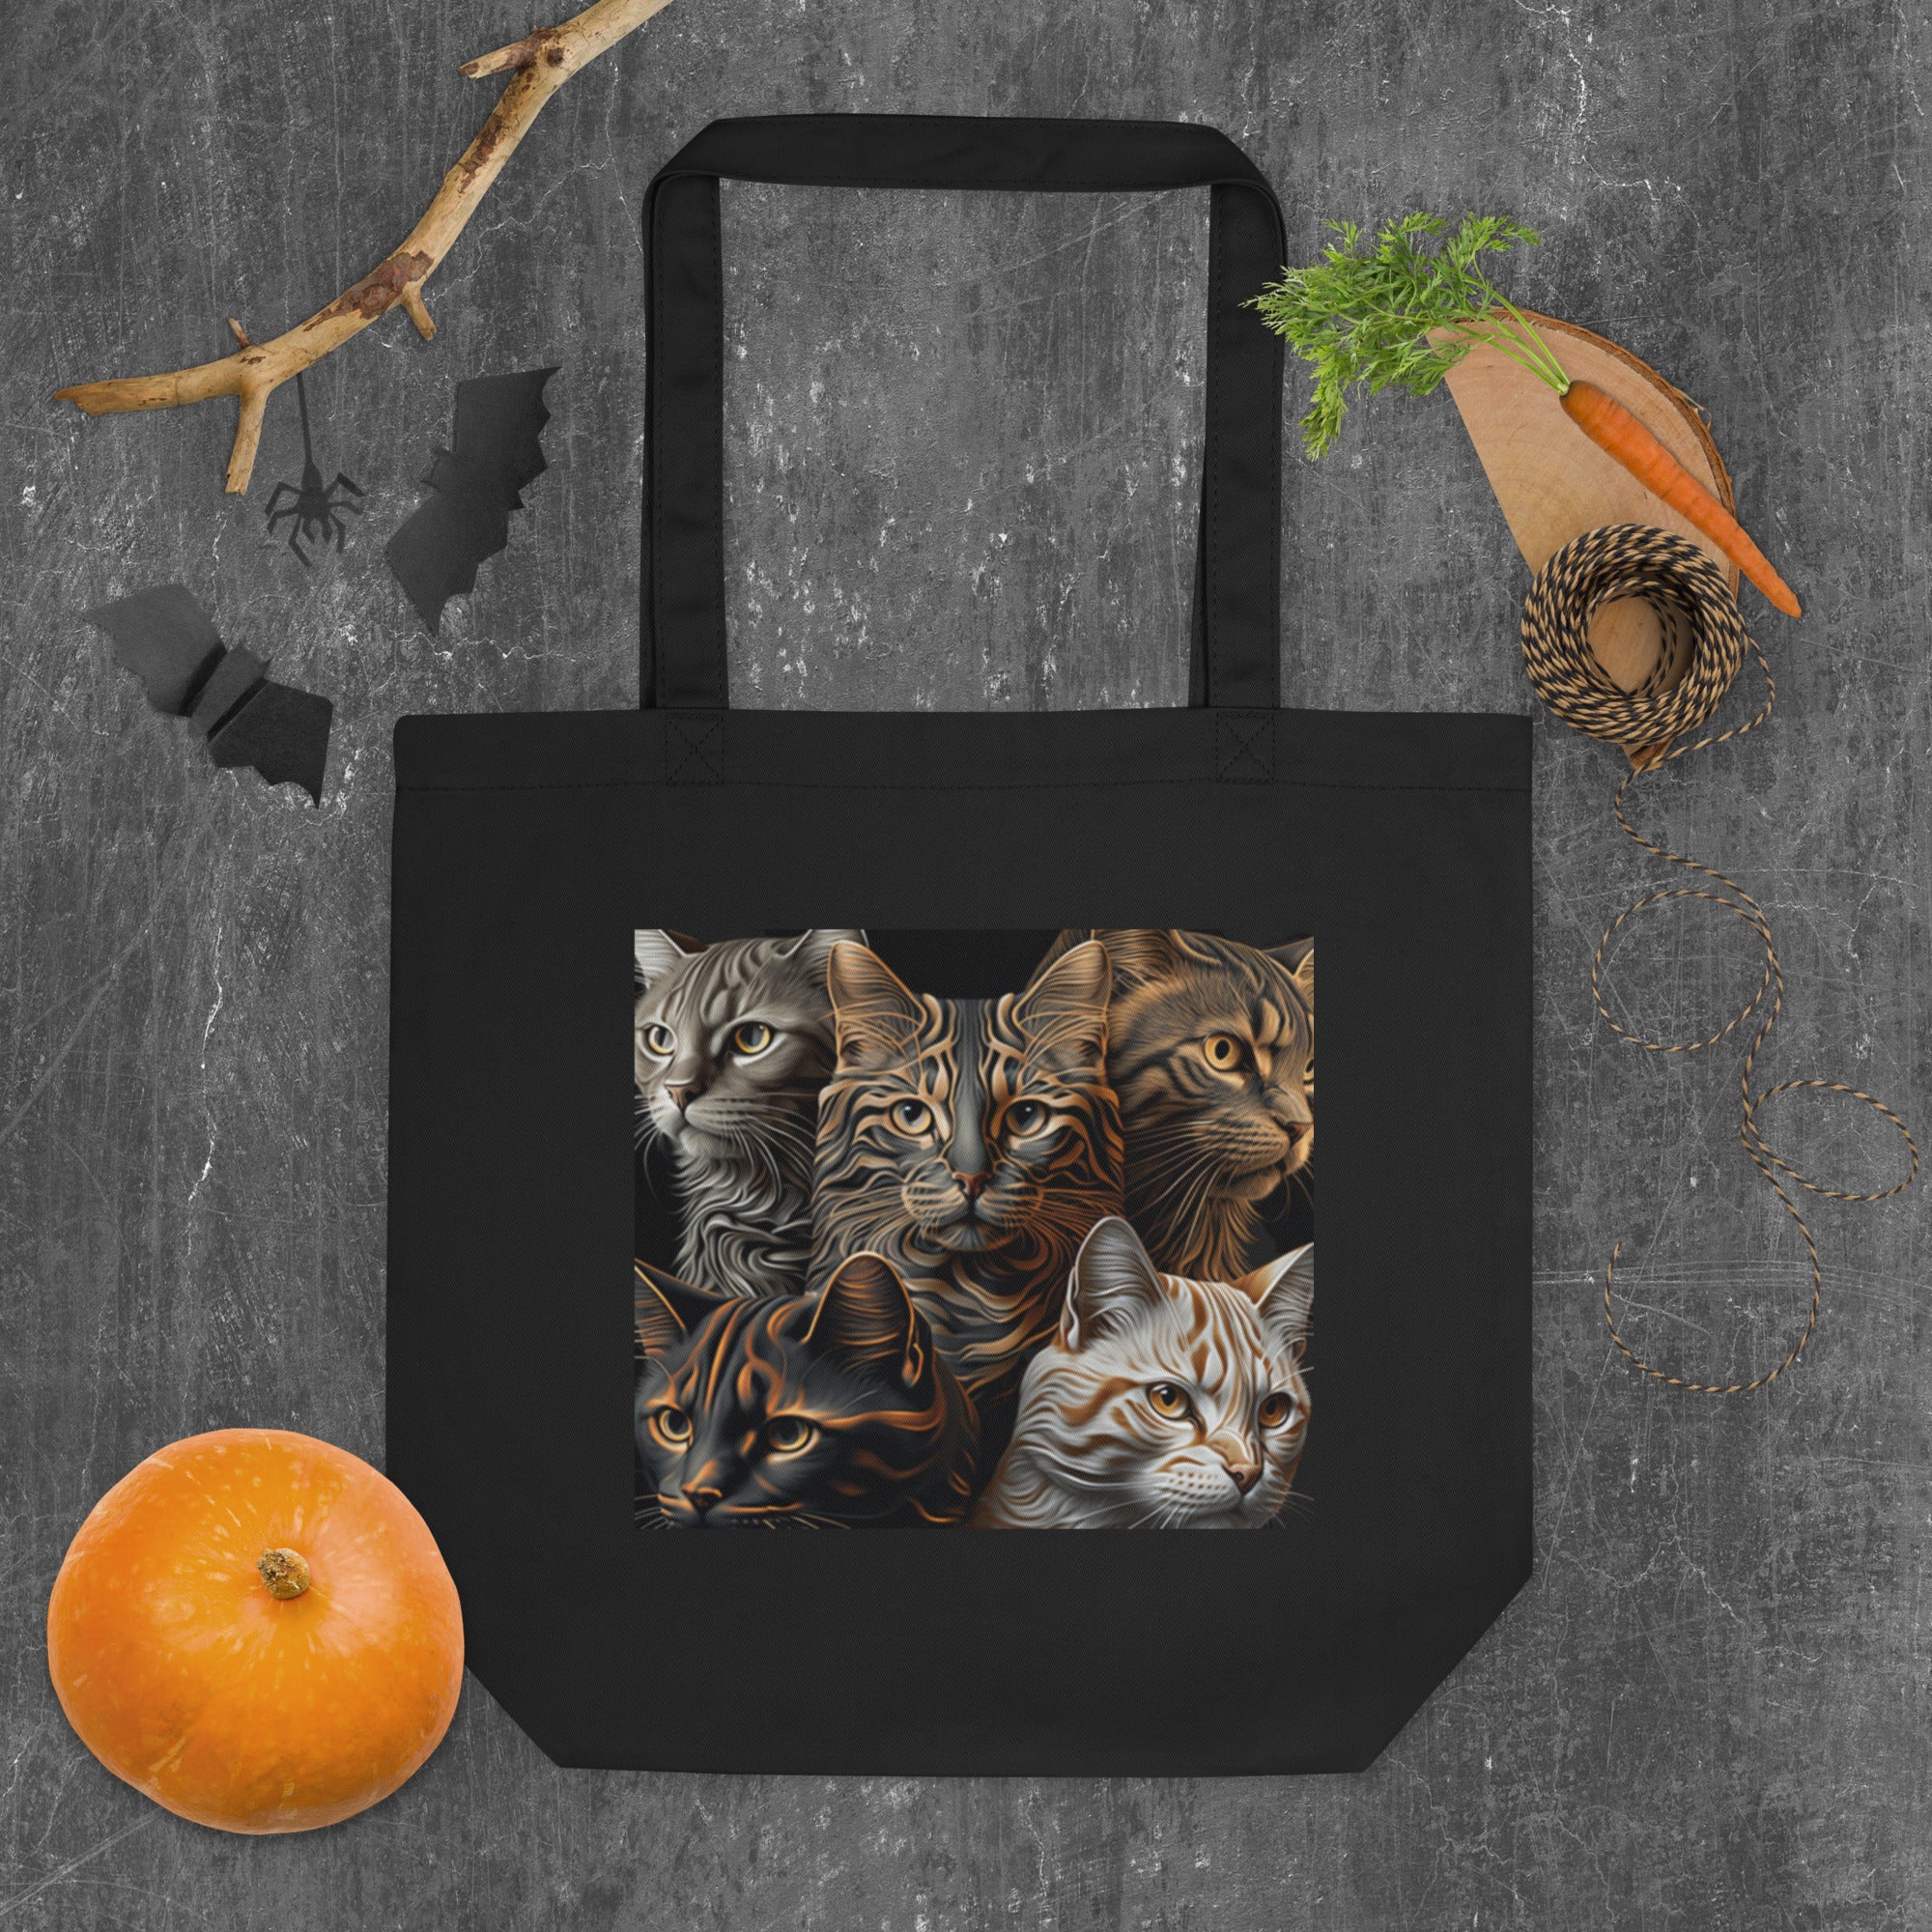 Eco Tote Bag, Cat Tote Bag, Back to School, Gift